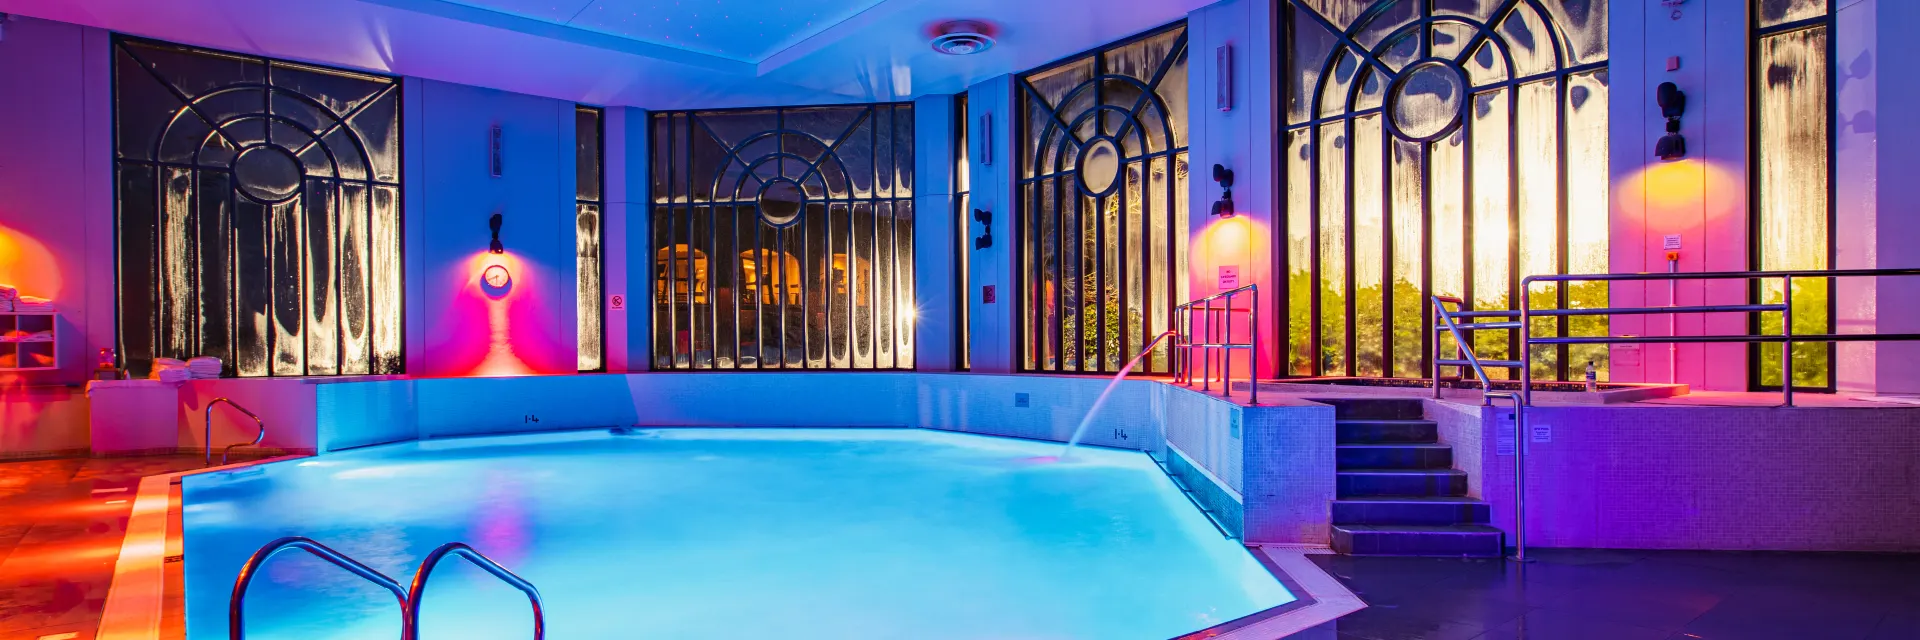 Wave Spa And Wellness At Crowne Plaza Gerrards Cross